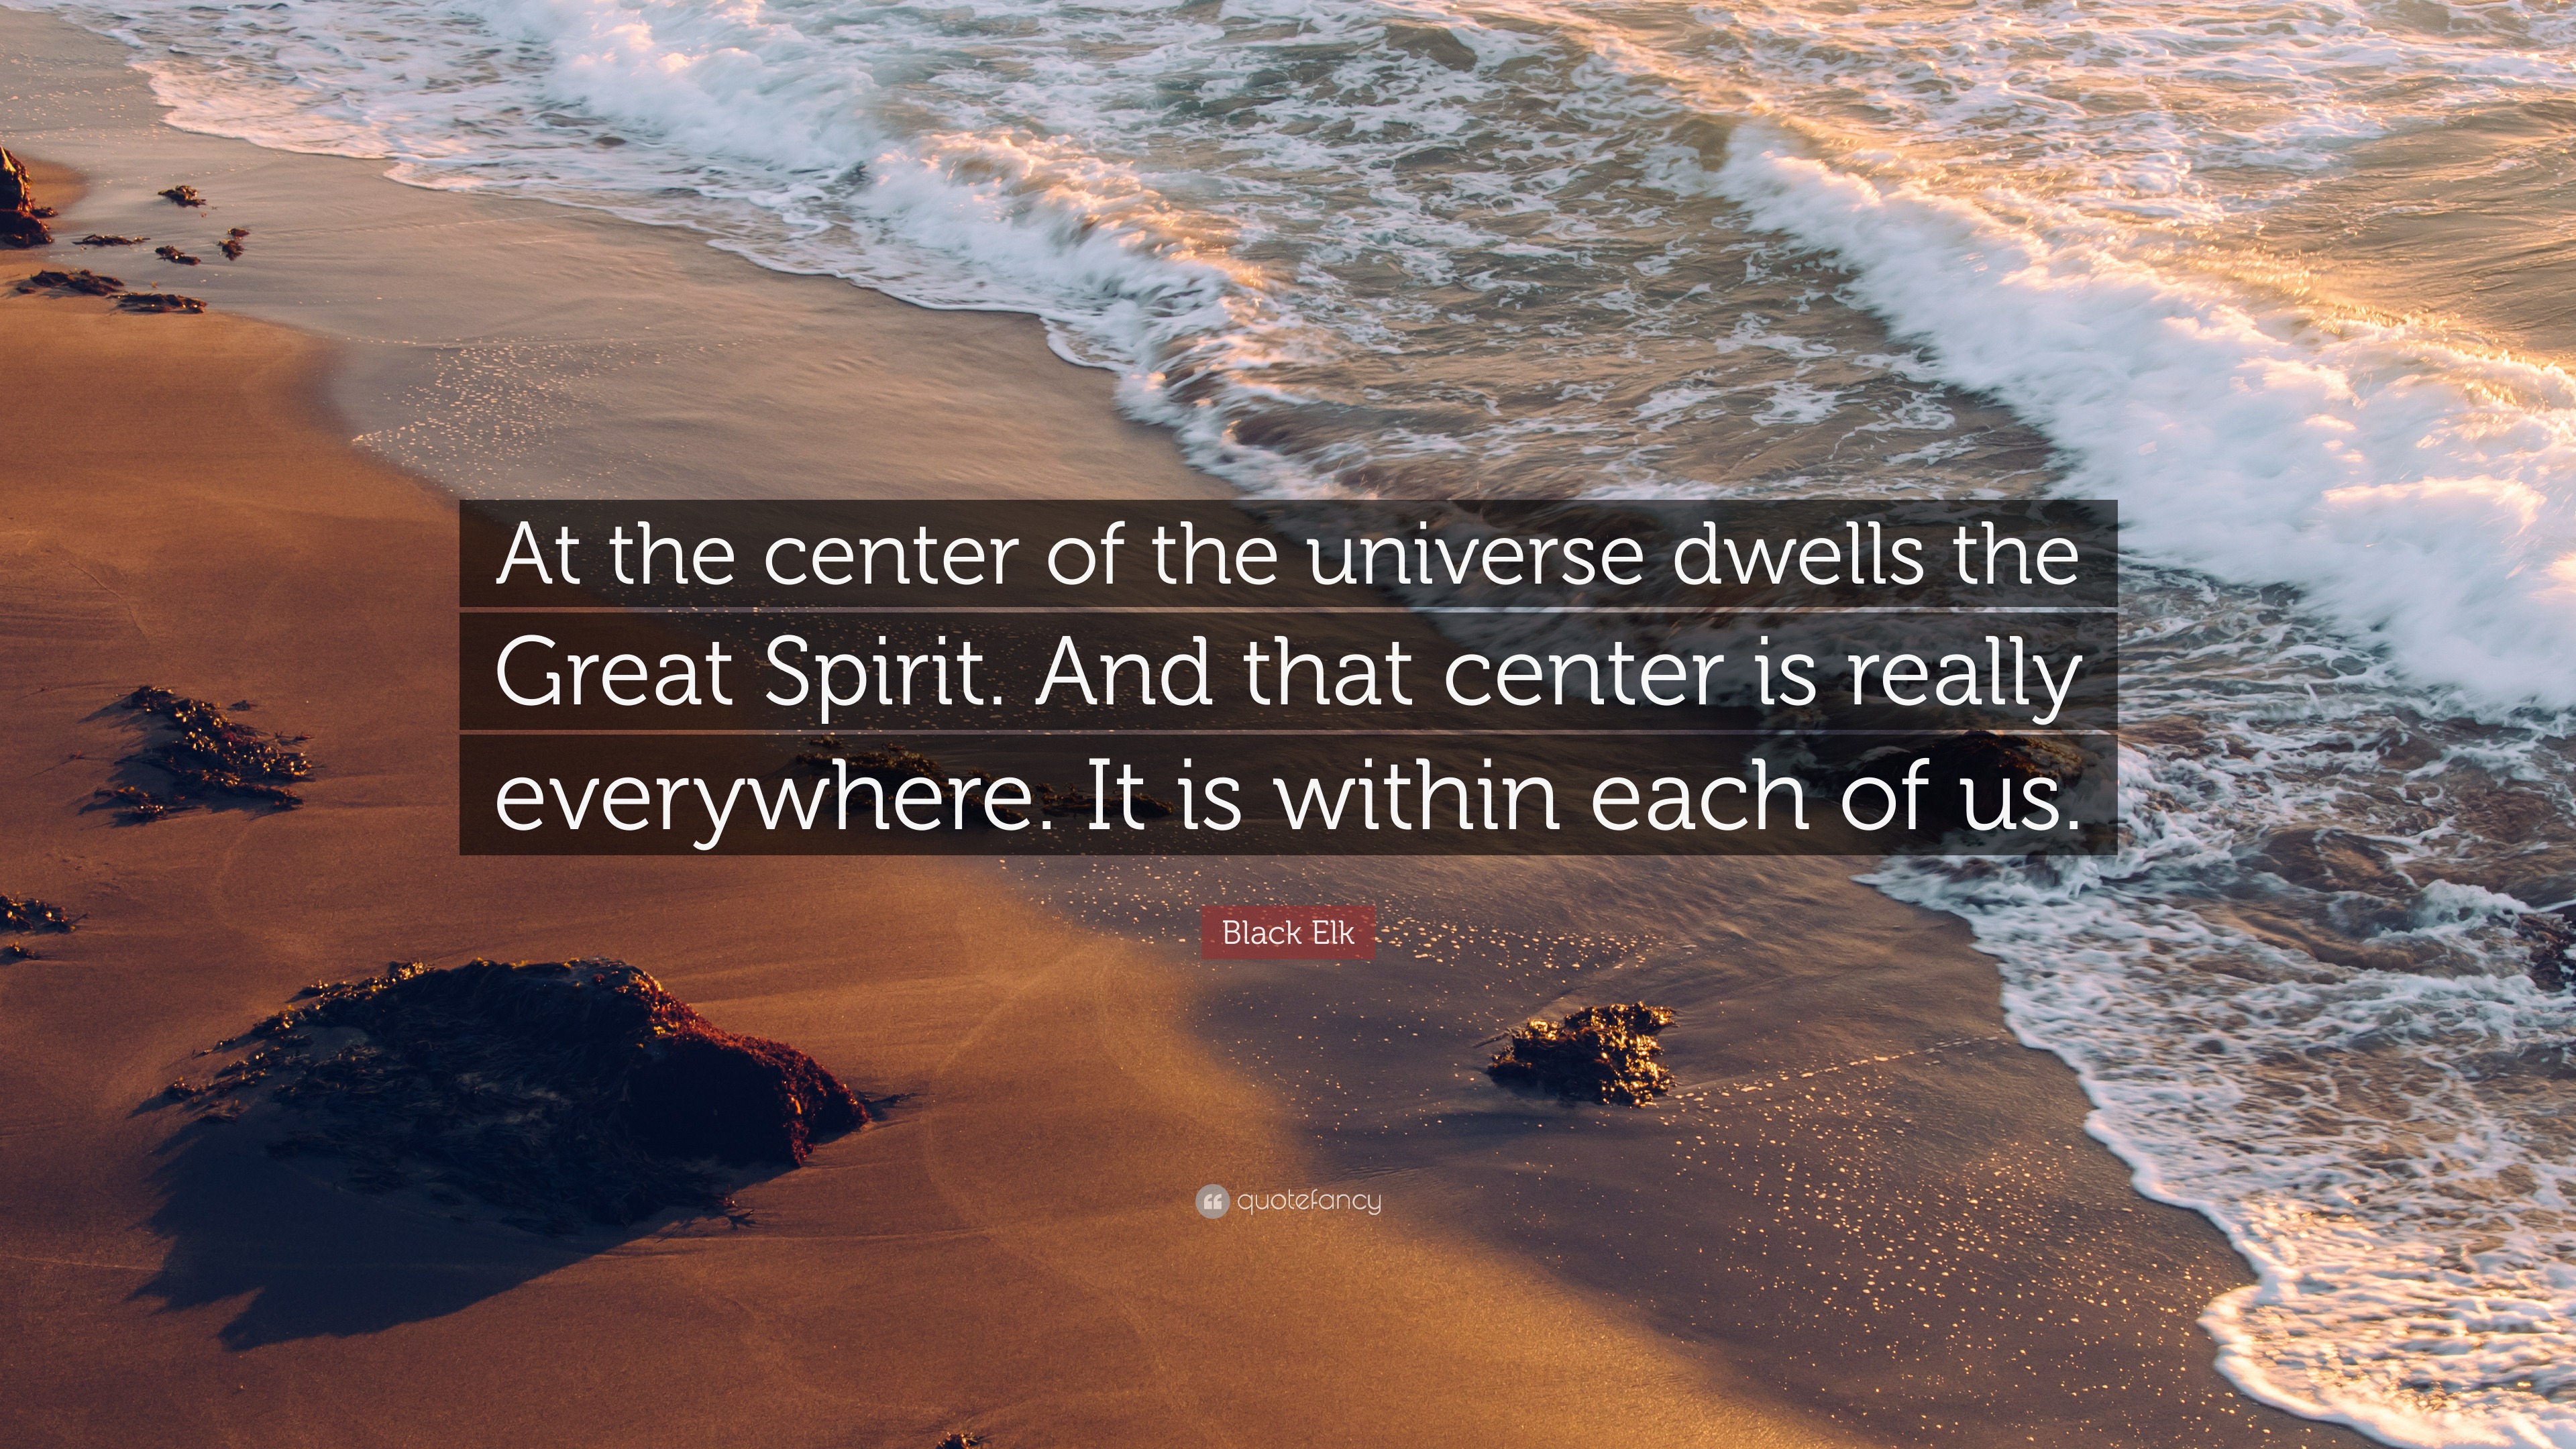 2263840-Black-Elk-Quote-At-the-center-of-the-universe-dwells-the-Great.jpg